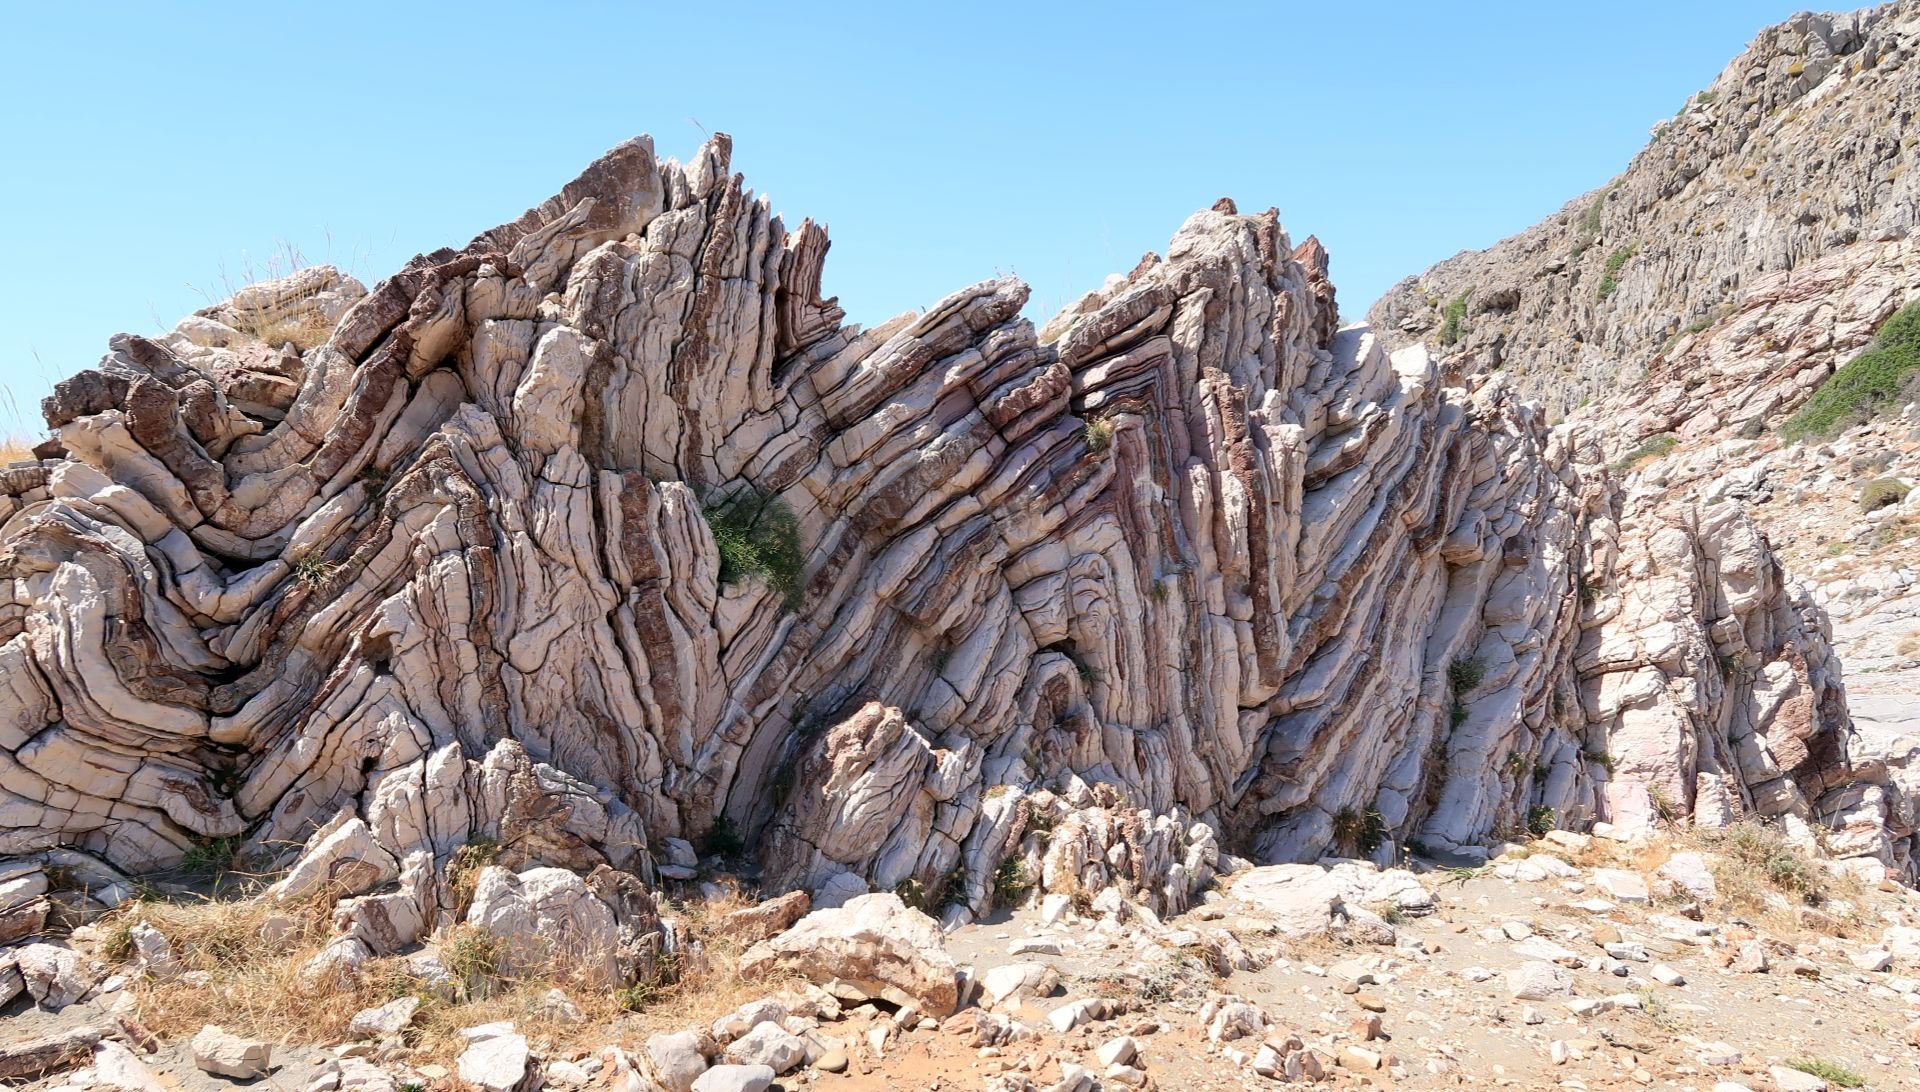 A stunningly unique phenomenon of geology in Greece: The Folded Marls near Agios Pavlos, on the island of Crete. Credit: Tony Cross.